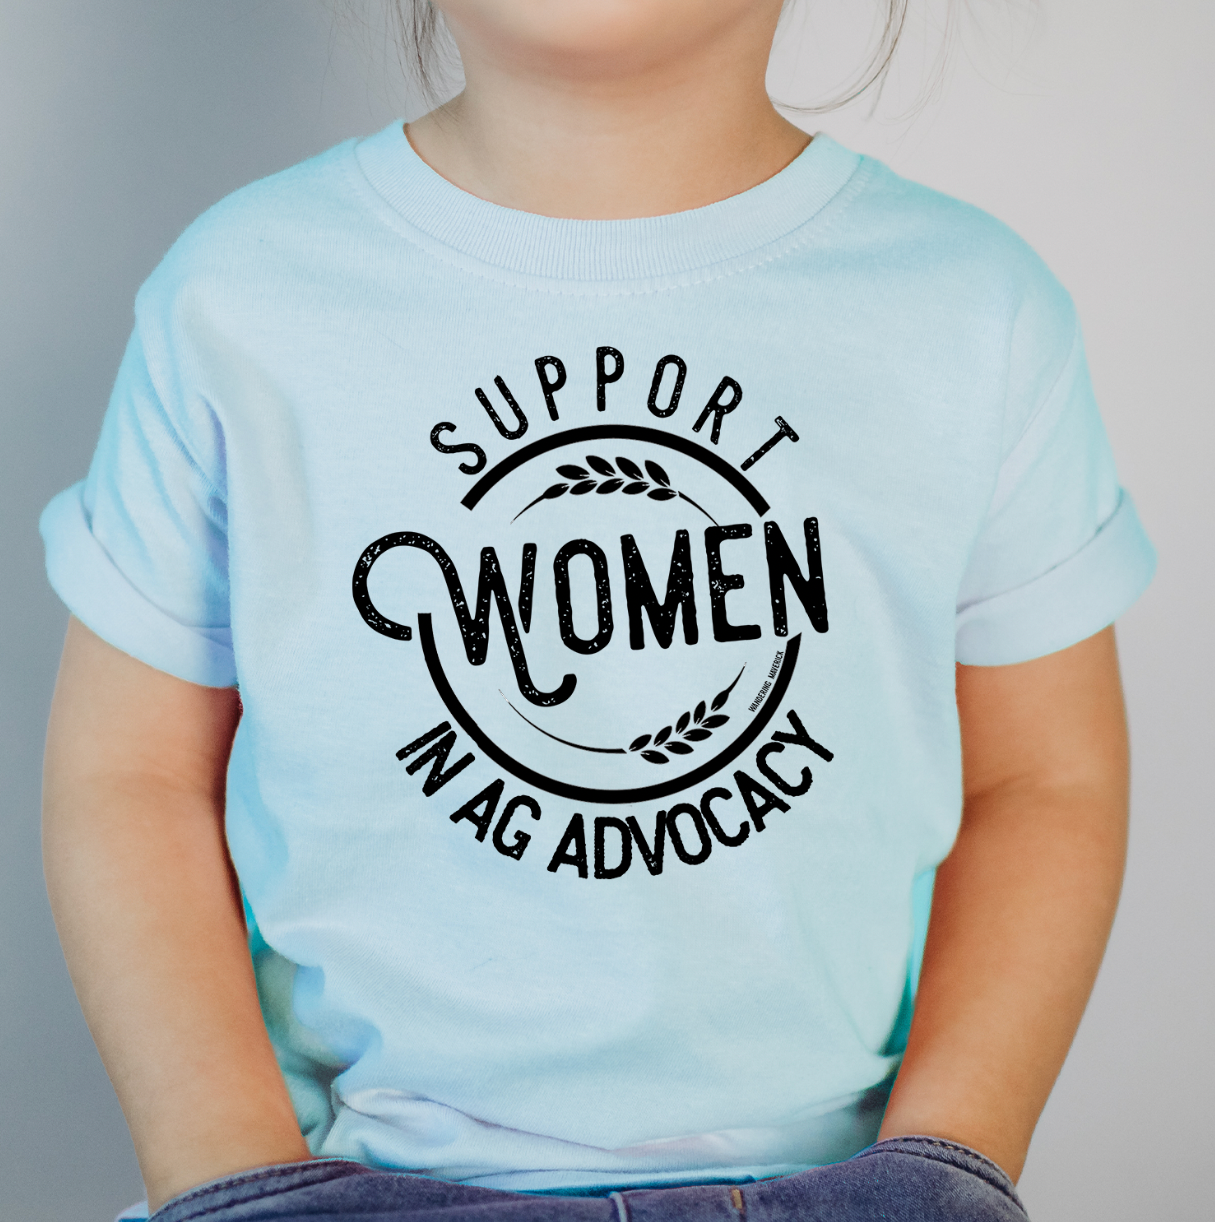 Support Women In Ag Advocacy One Piece/T-Shirt (Newborn - Youth XL) - Multiple Colors!